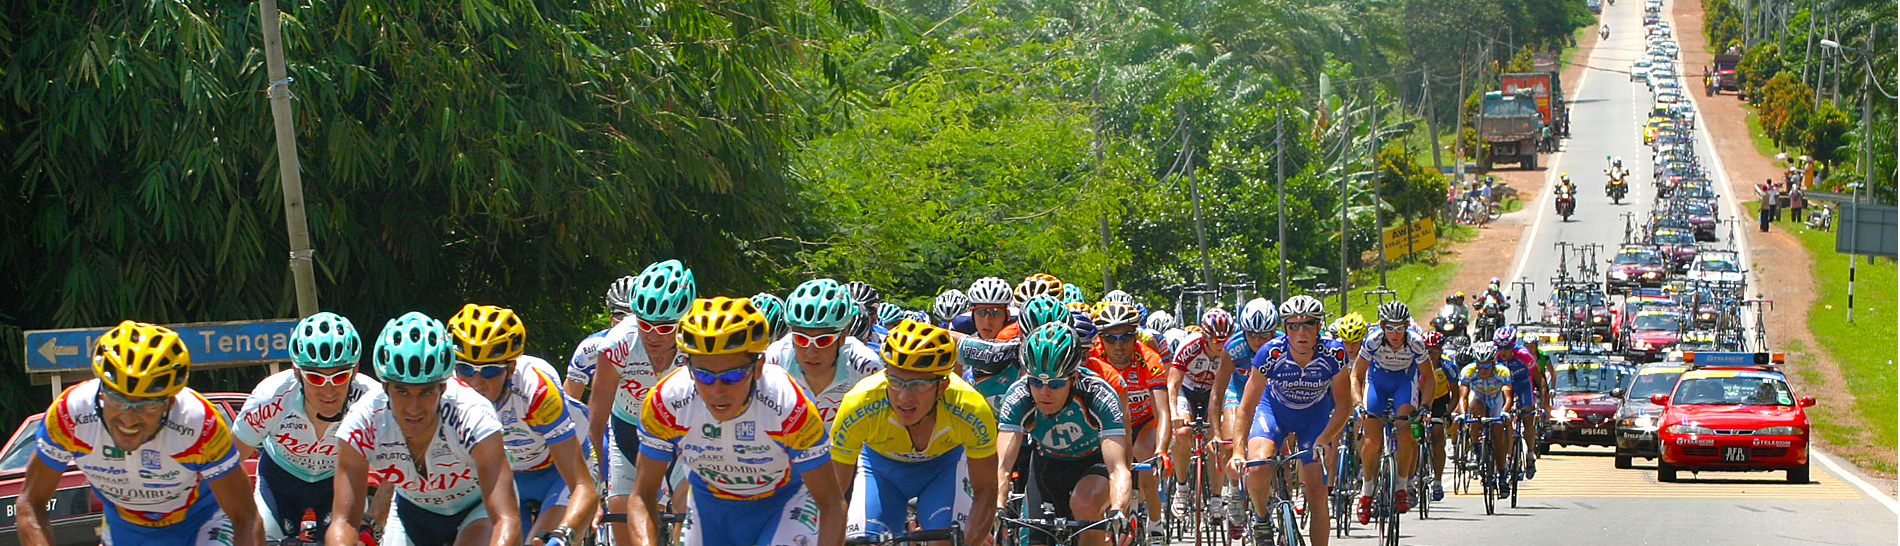 Le Tour de Langkawi: view of peloton and cavalcade approaching camera